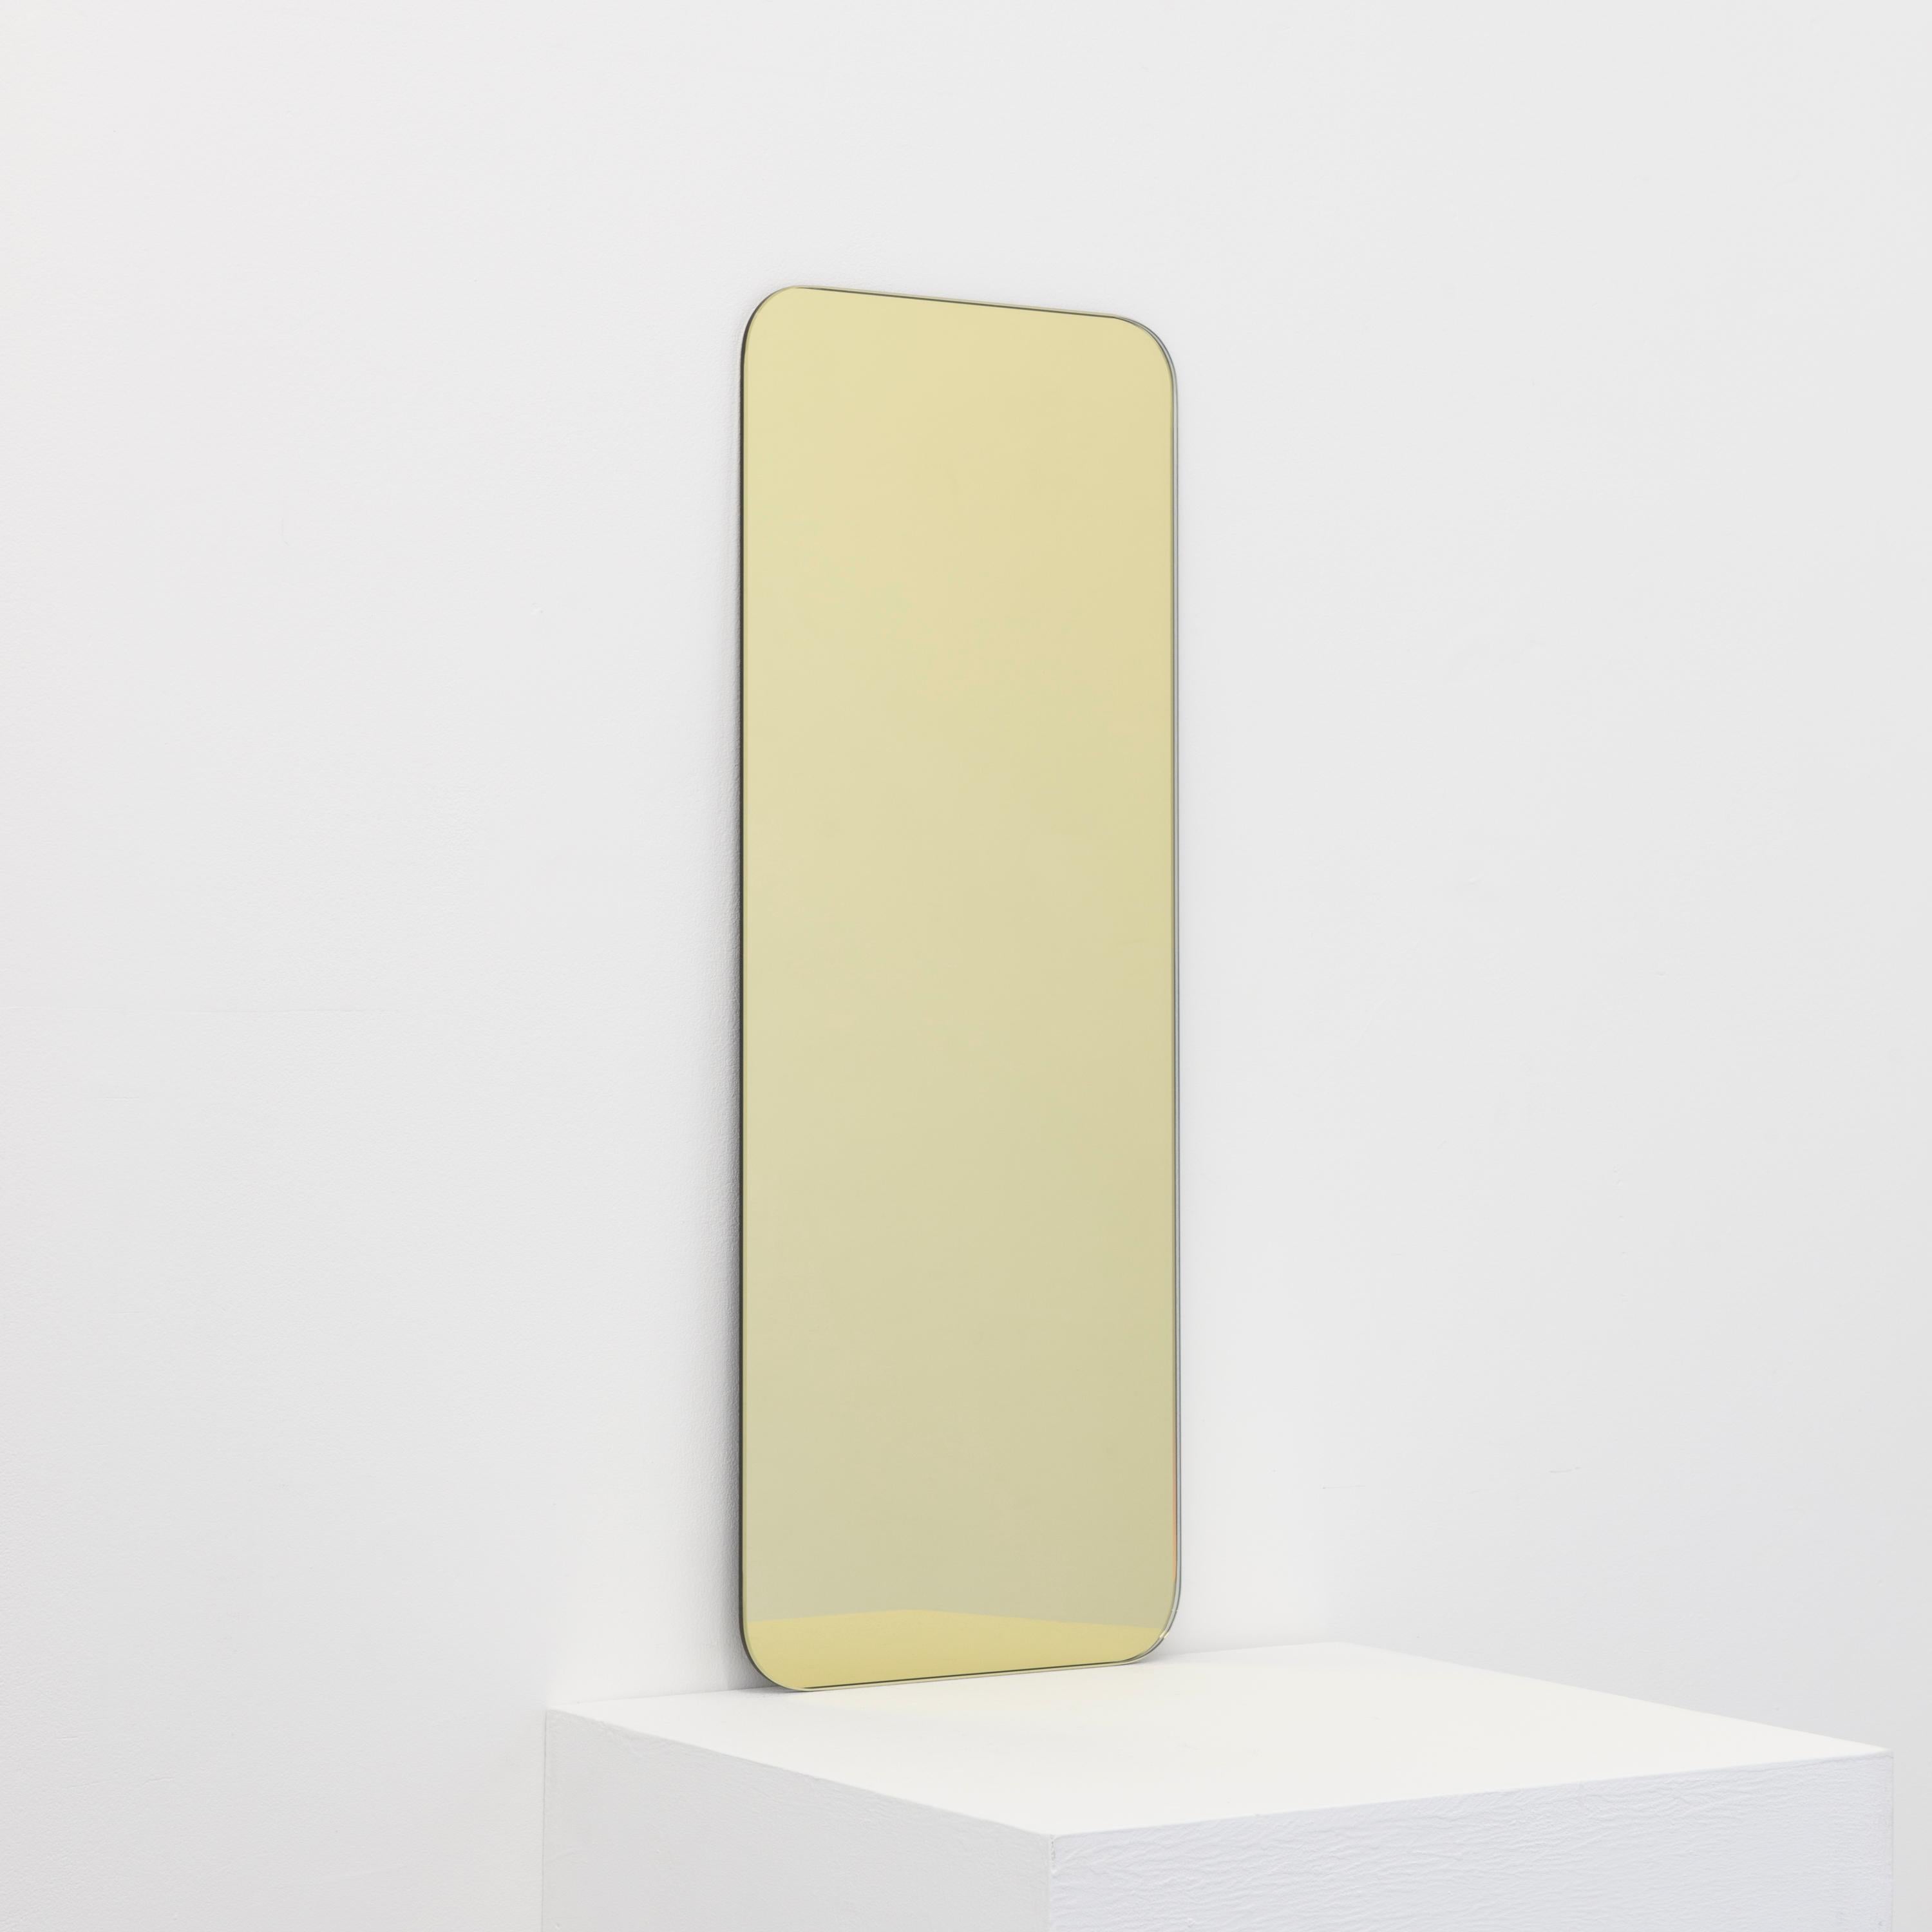 Minimalist rectangular shaped frameless gold tinted mirror with a floating effect. Quality design that ensures the mirror sits perfectly parallel to the wall. Designed and made in London, UK.

Fitted with professional plates not visible once